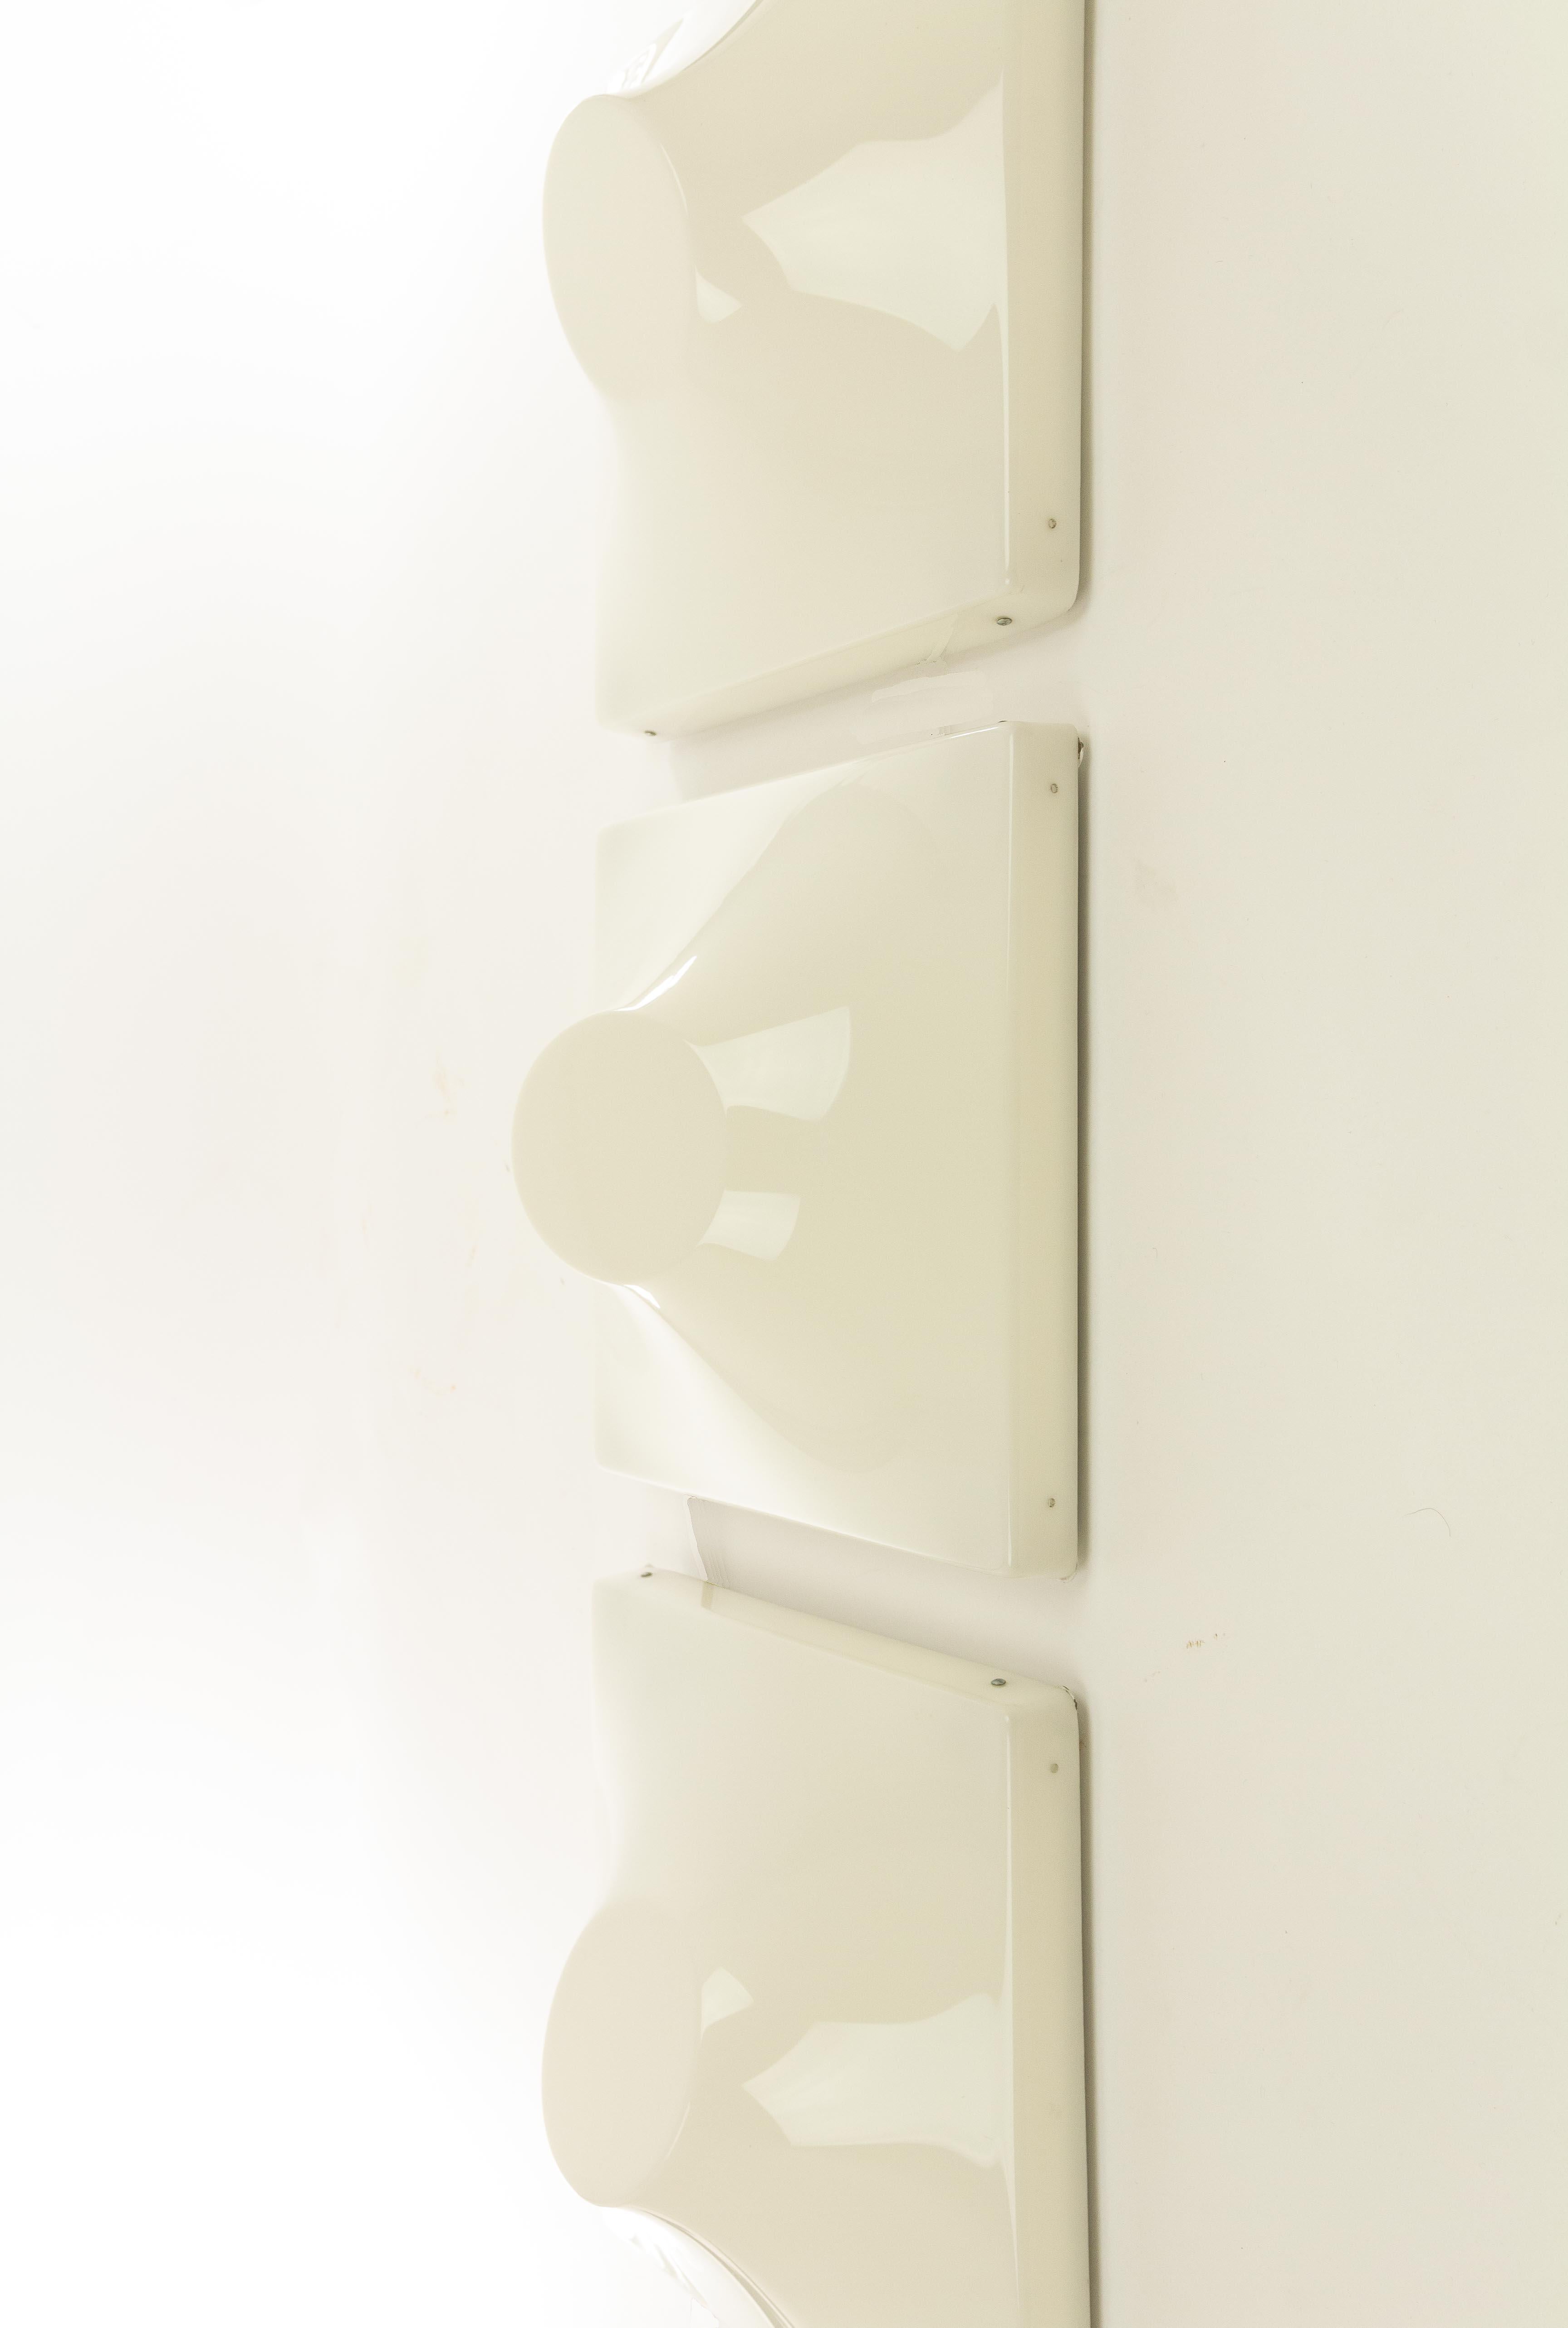 Set of three wall lamps designed by Ennio Chiggio and produced by Emmezeta in the 1970s.

The lamps consist of two parts; a metal structure that can be attached to the wall and a three-dimensional plastic front that can be clicked to the metal